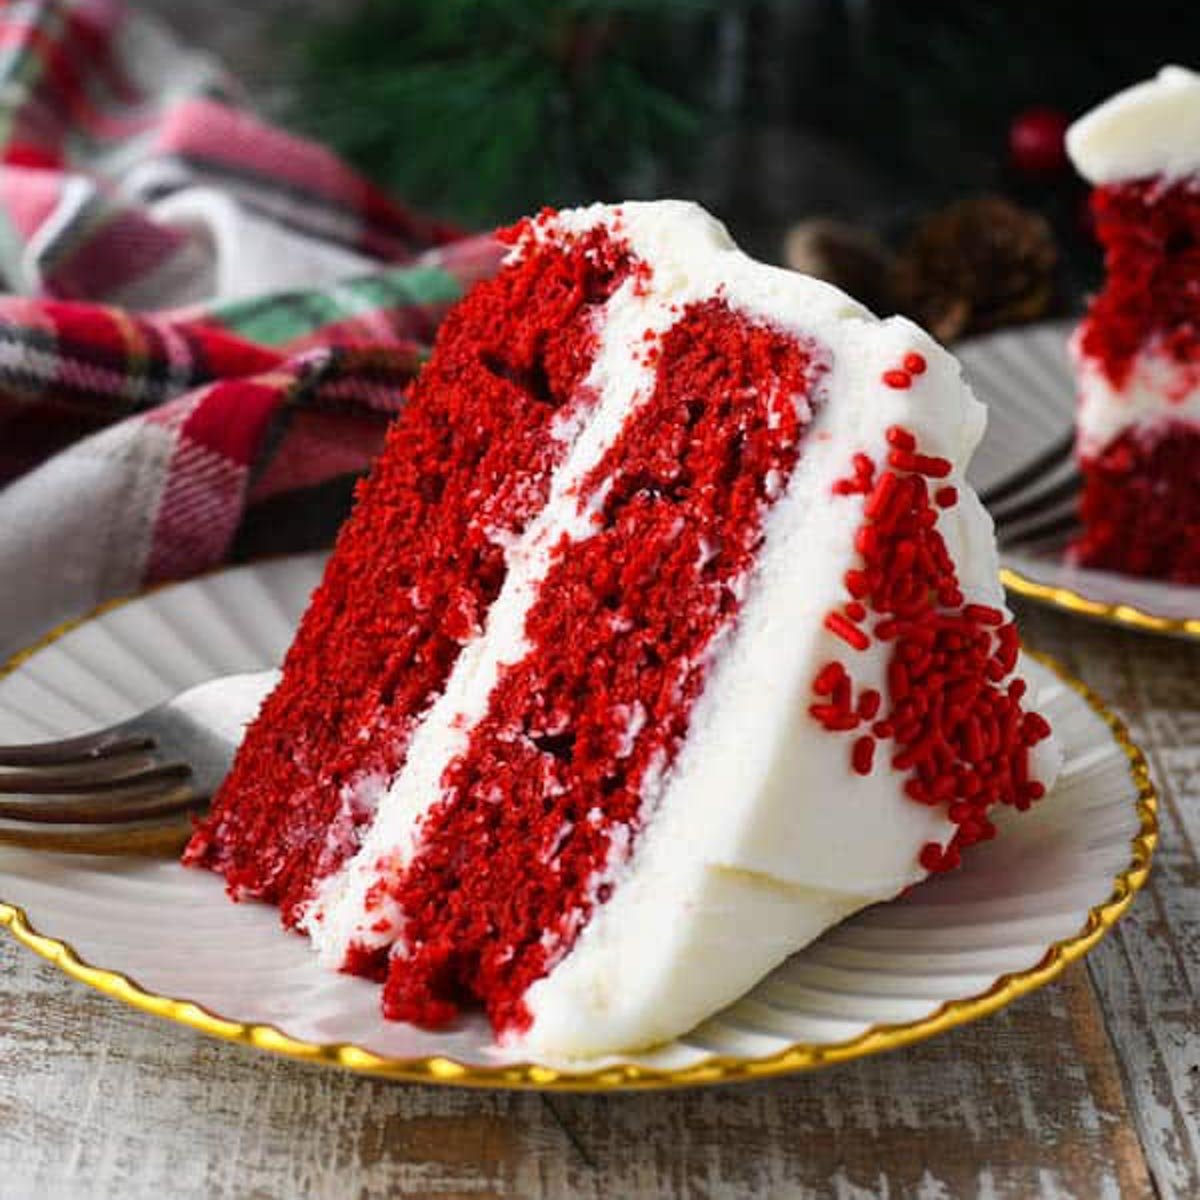 BREAD & Beyond | Delicious Red Velvety Texture Cake